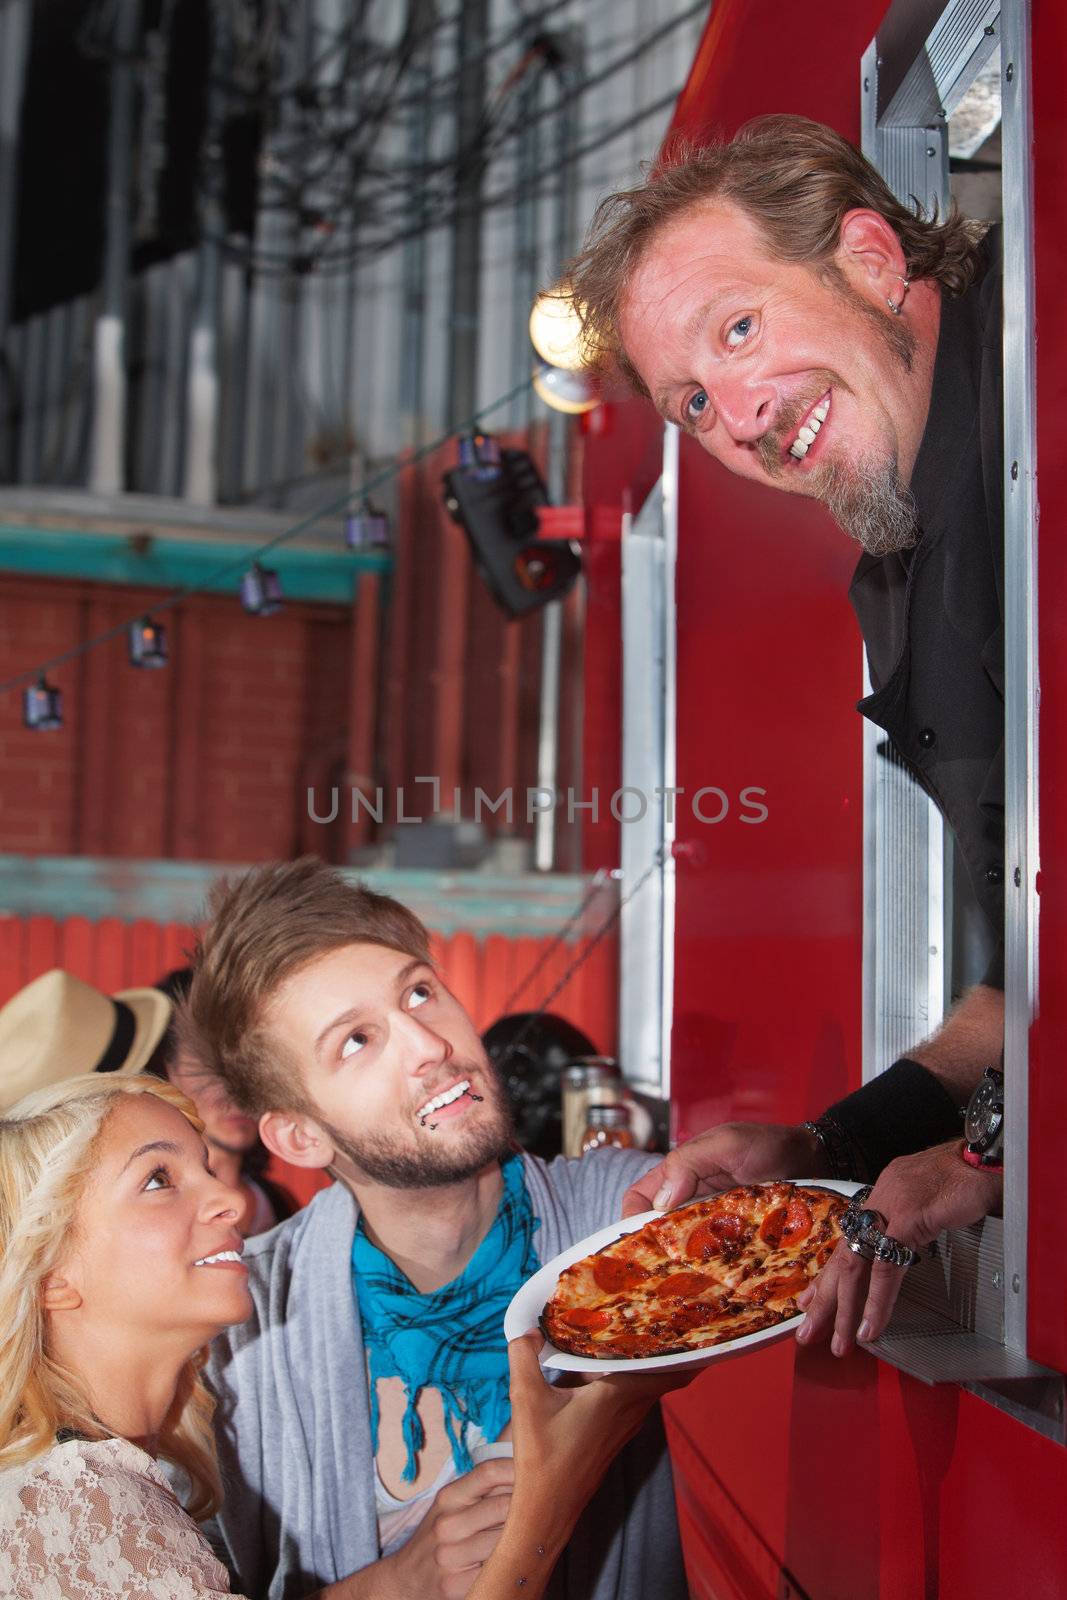 Smiling Chef holding pizza with teenage couple